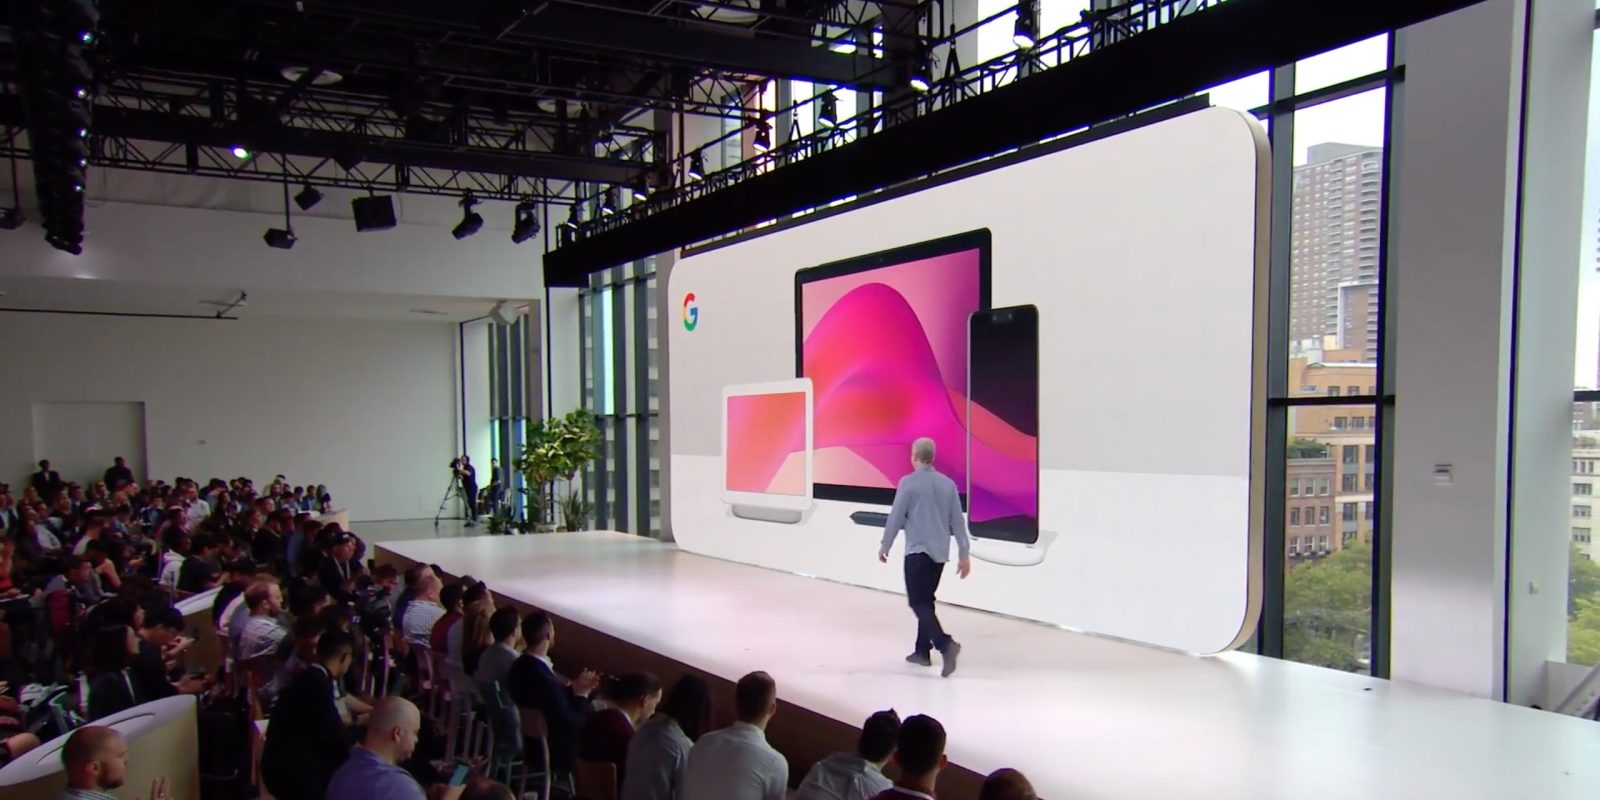 Rick Osterloh talks Pixel 3, flops, and Made by Google’s future ahead of I/O 2019 announcements - 9to5Google thumbnail